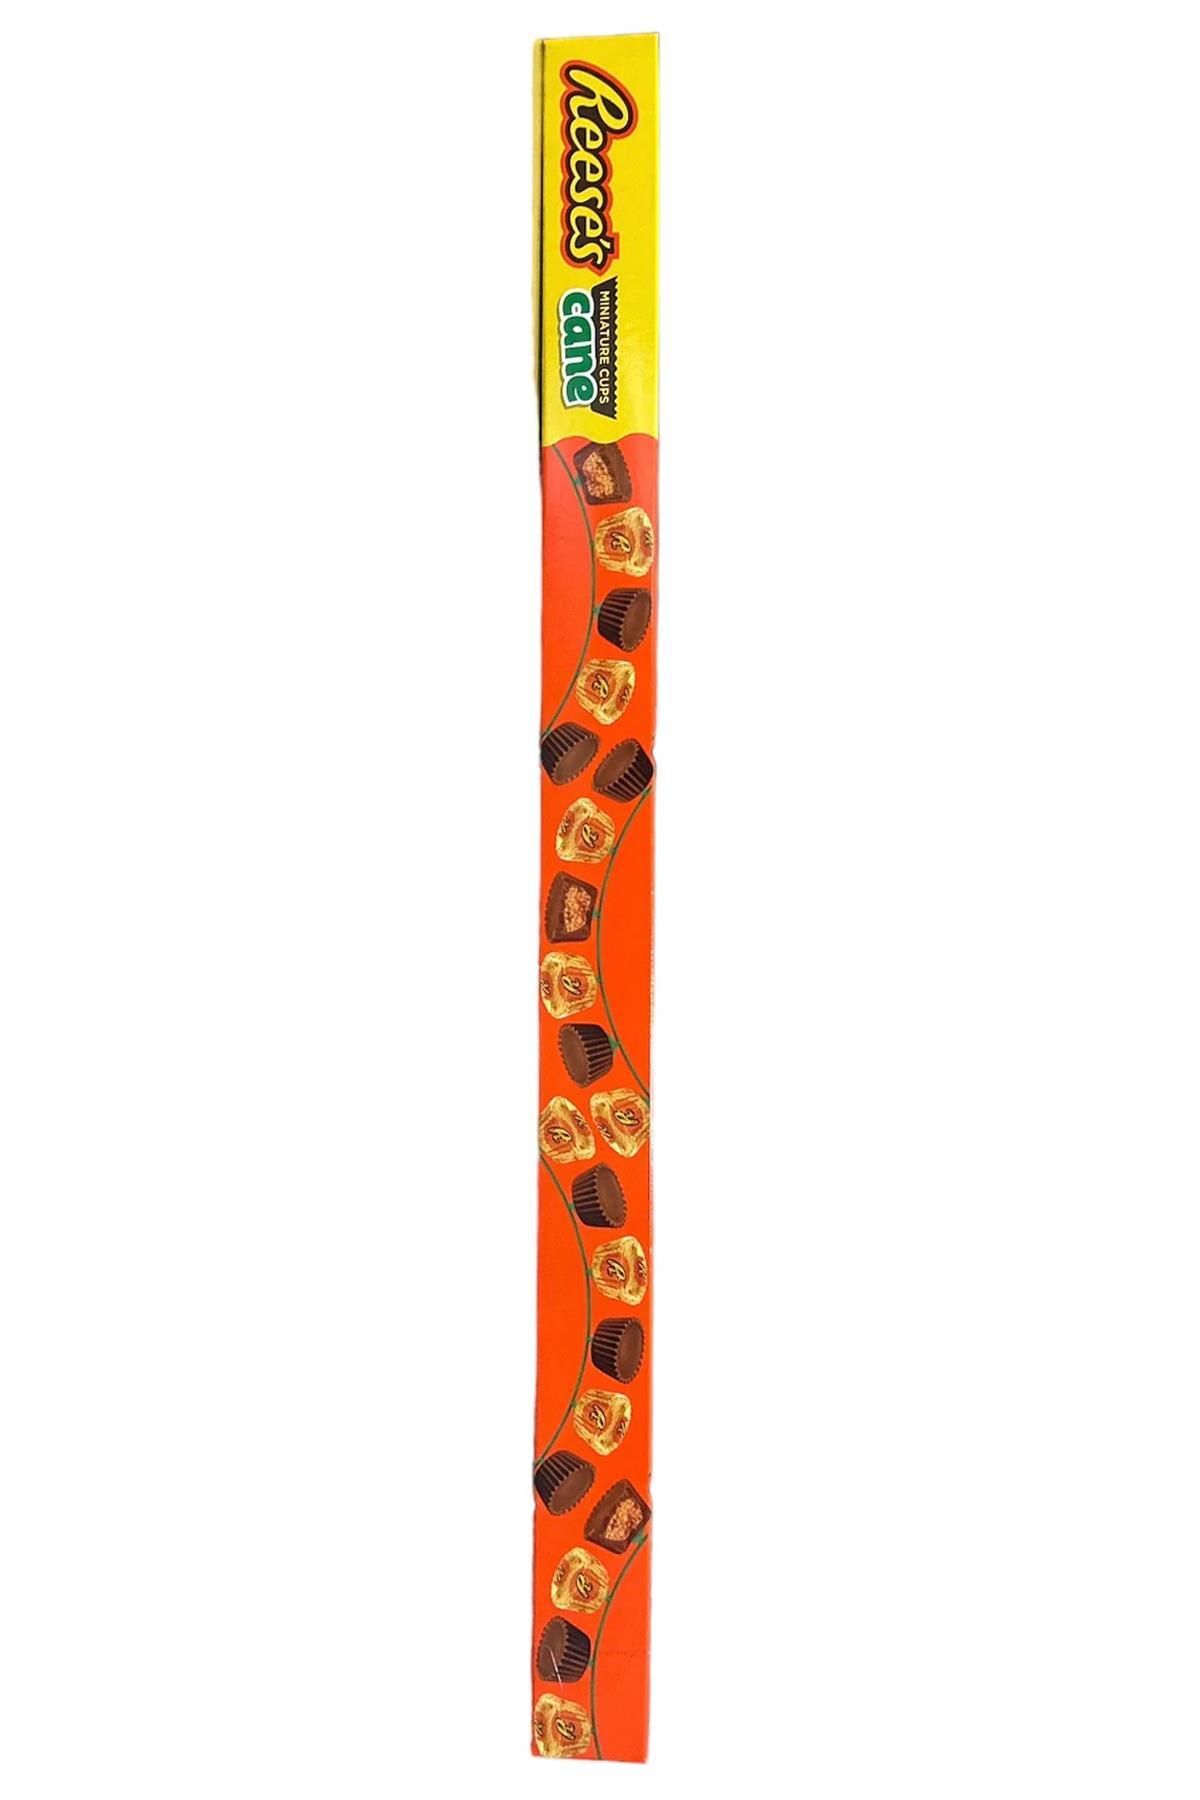 Jef Reese's Miniature Cups Cane 200GR